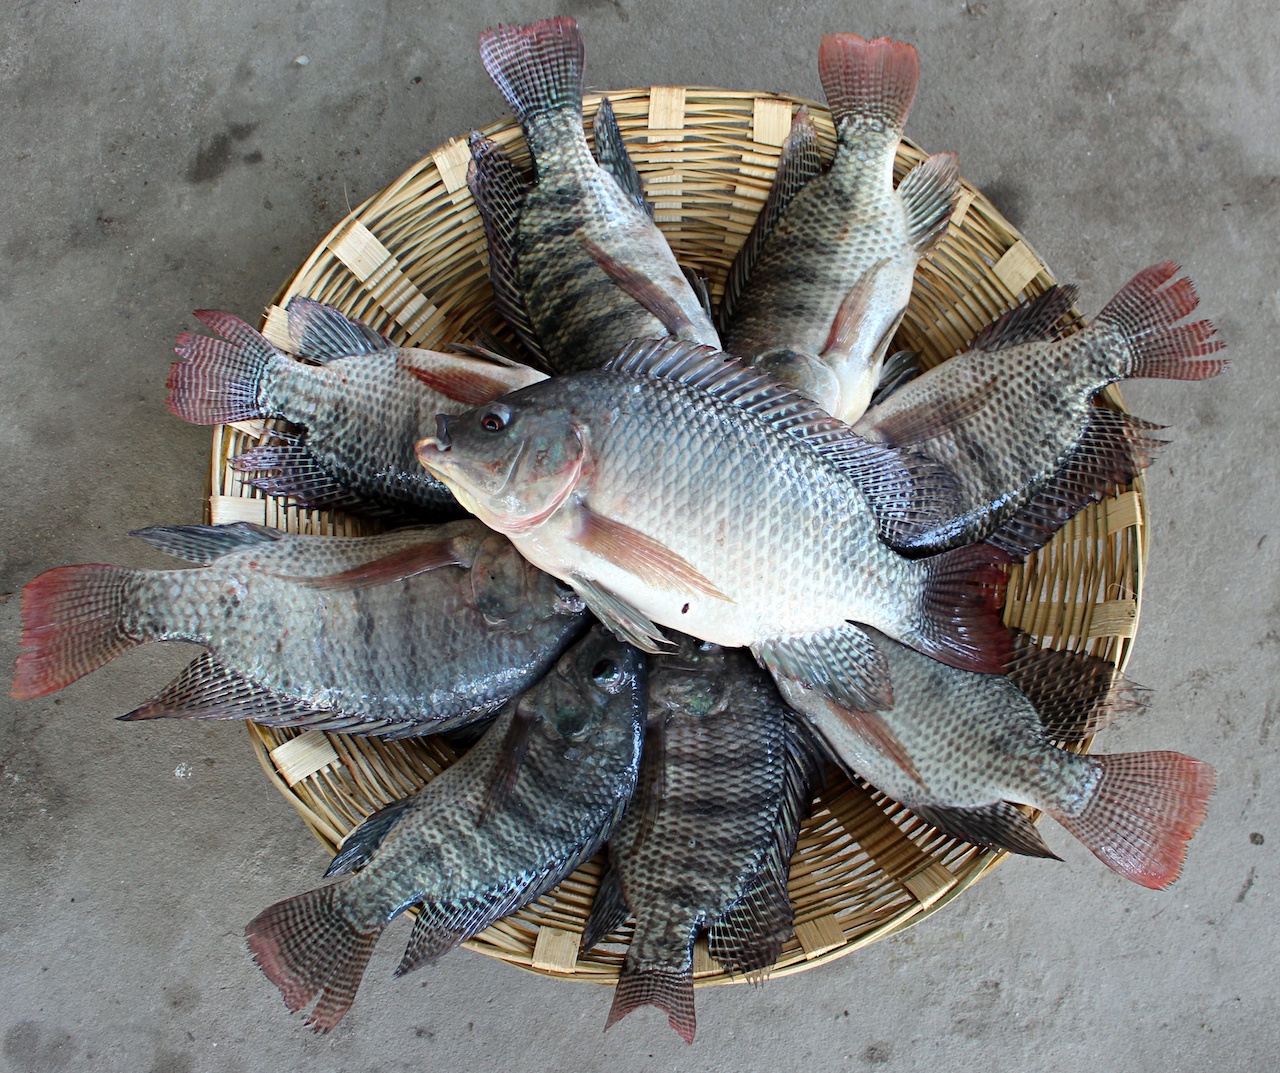 Tilapia in a basket (Photo provided by M. Gulam Hussain)